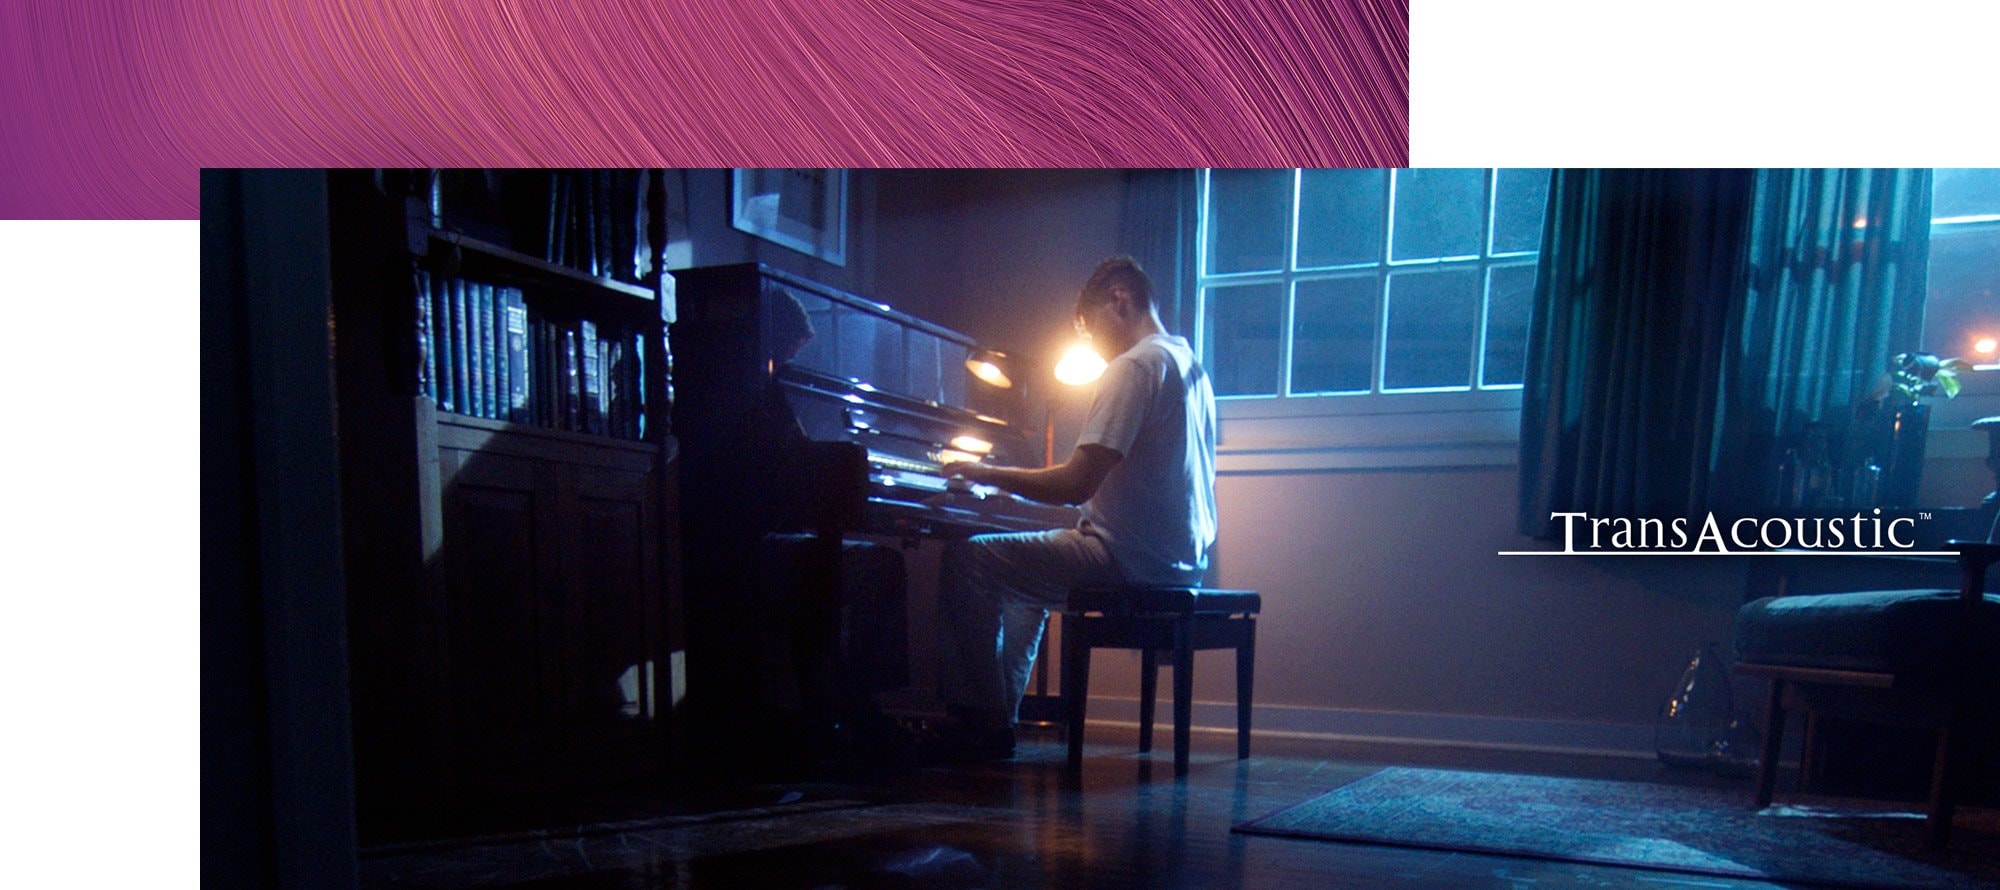 Lifestyle image of a man playing Transacoustic piano - Desktop